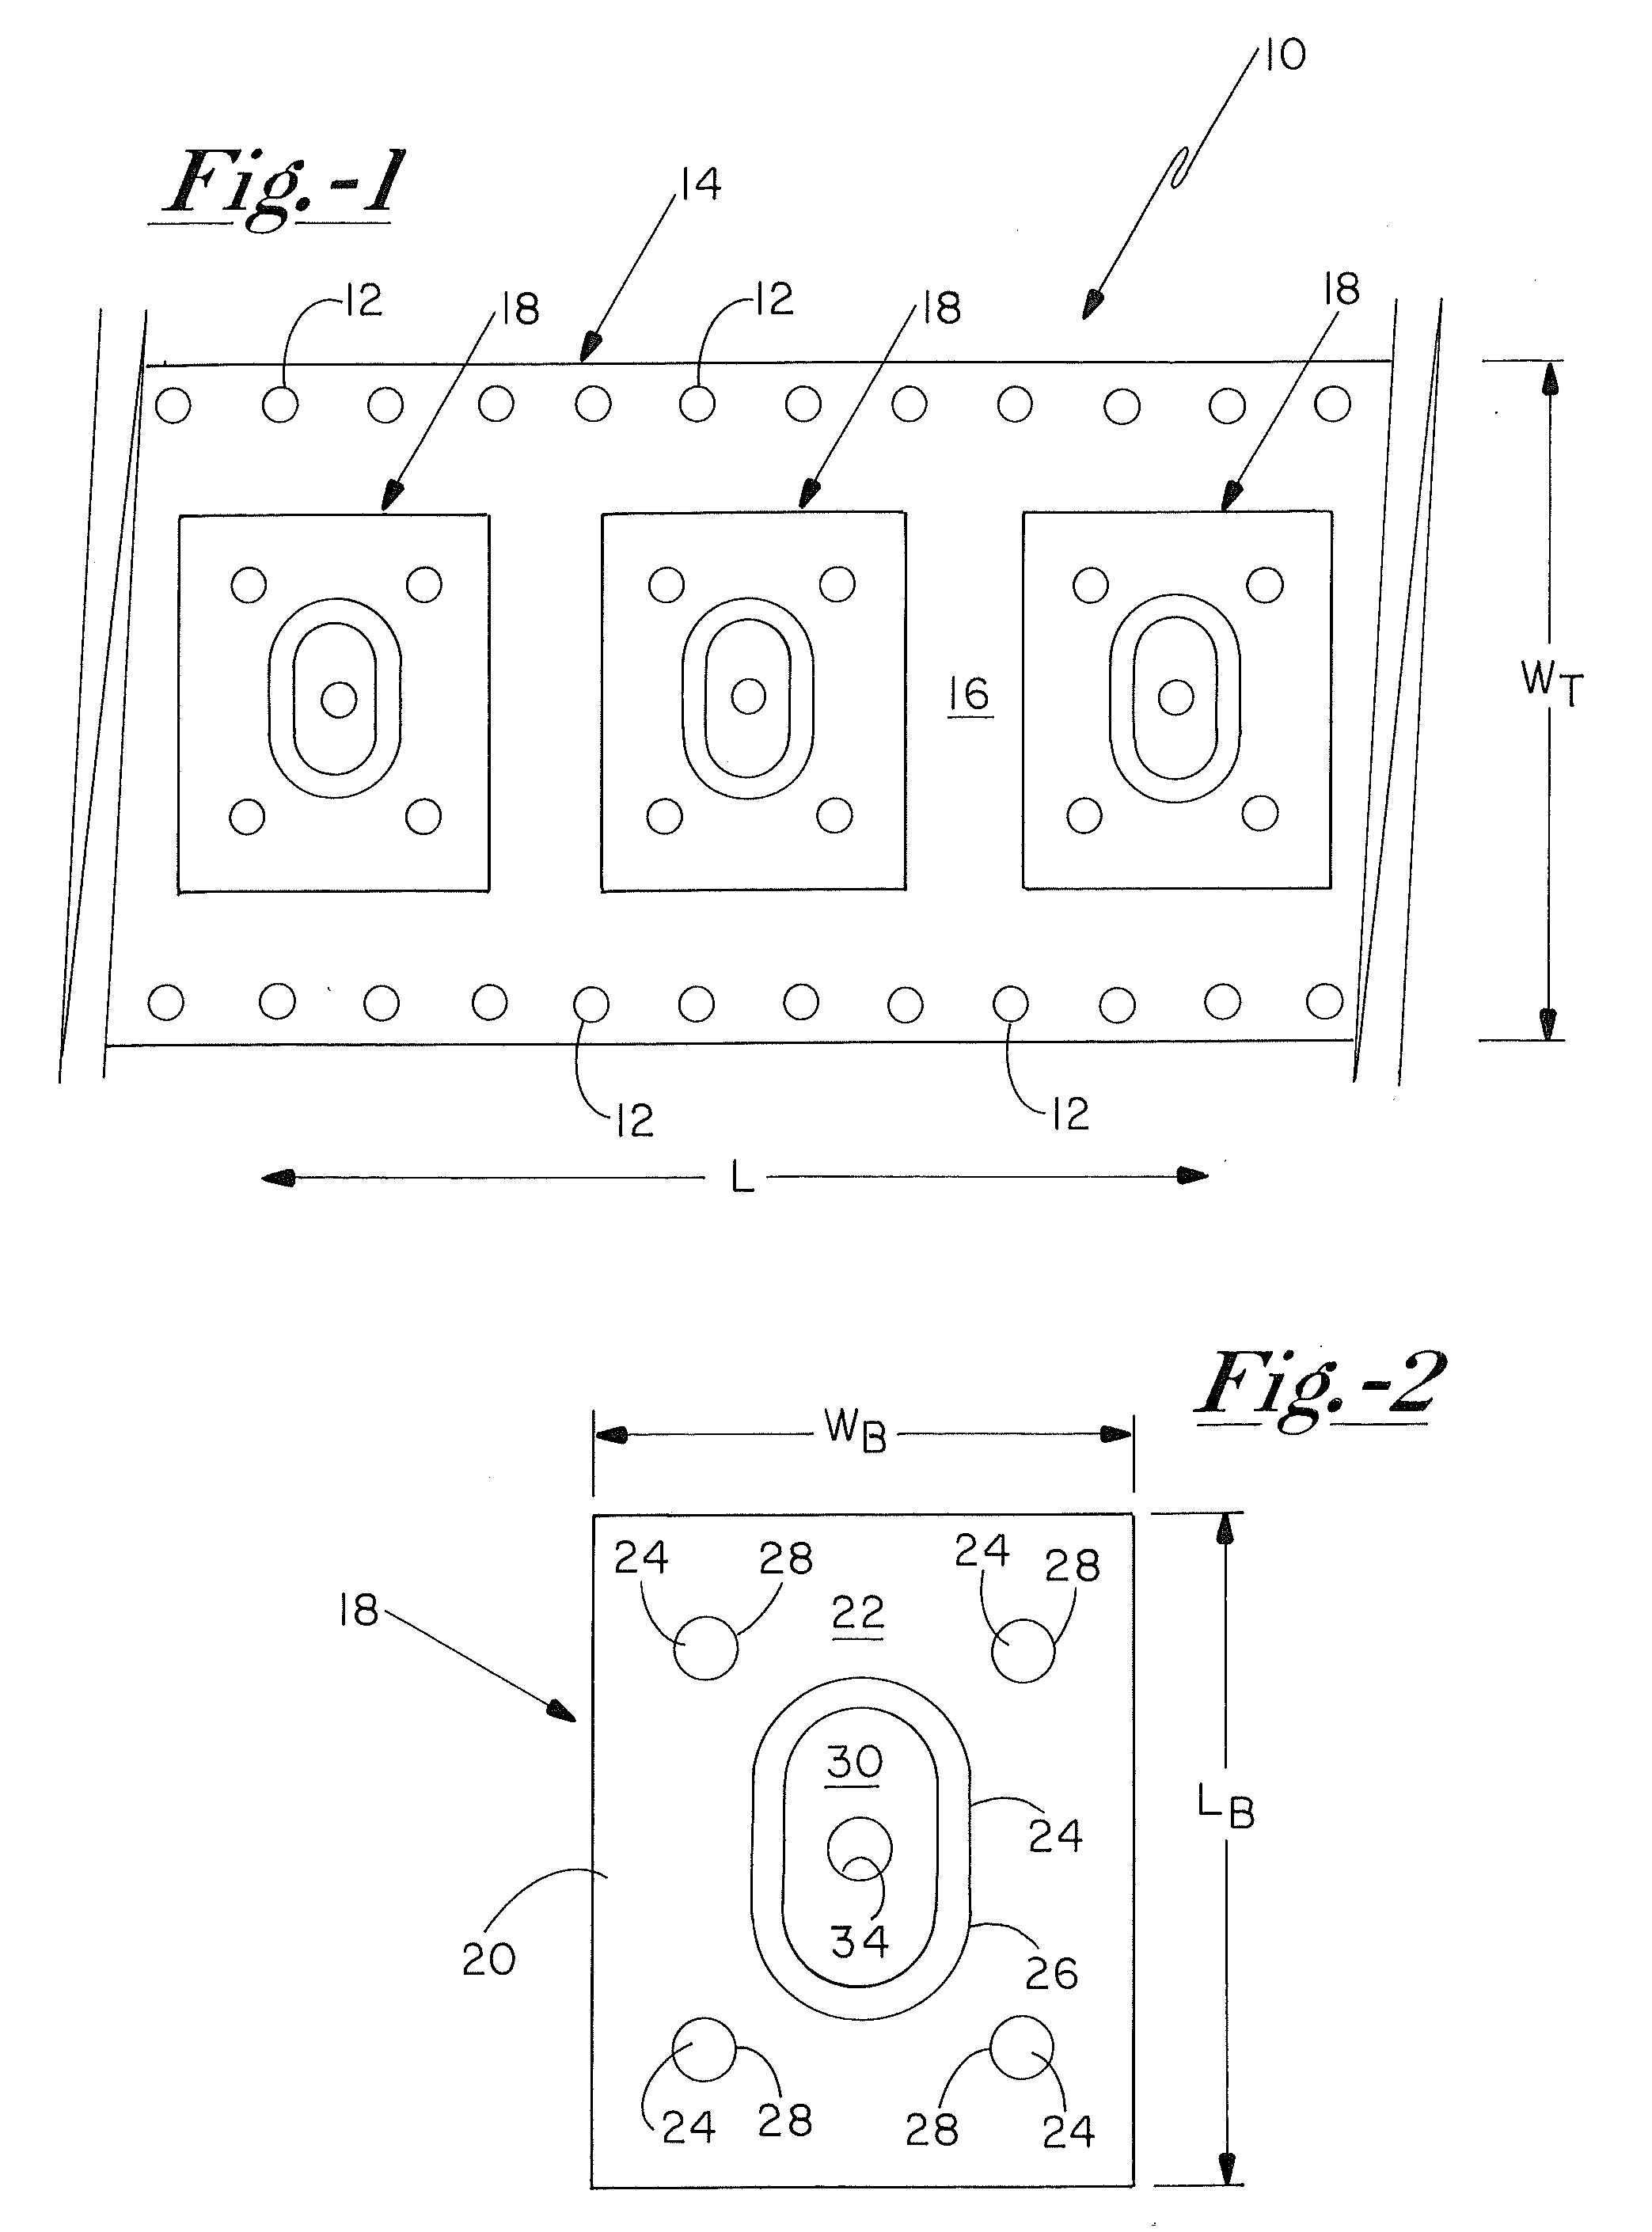 Method for packaging thermal interface materials